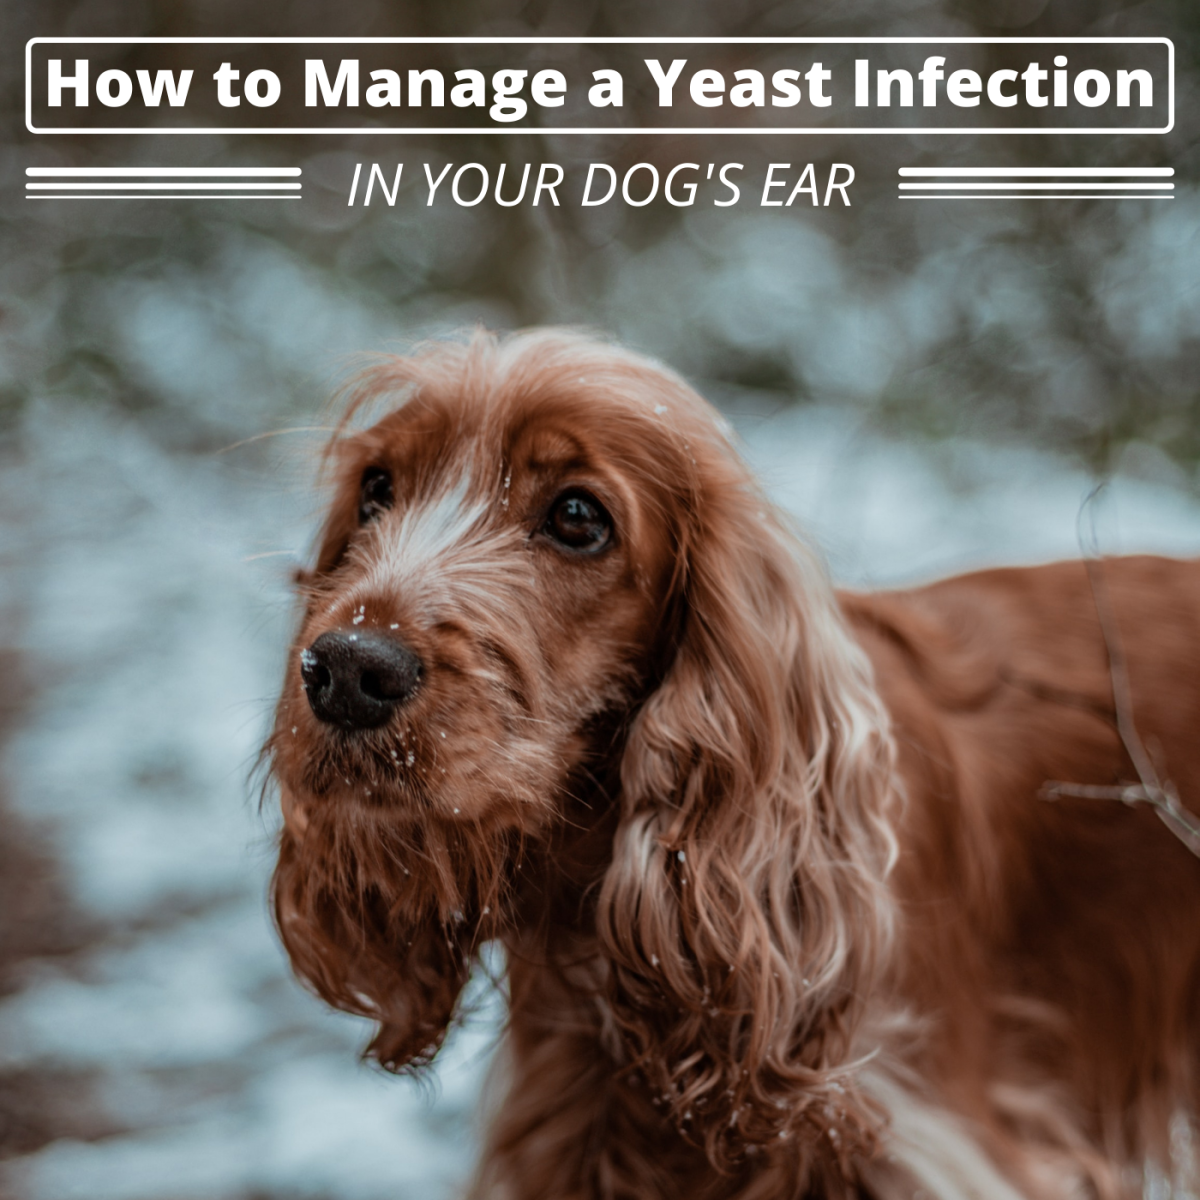 With your veterinarian's guidance, you may be able to manage your dog's yeast infection from home. 